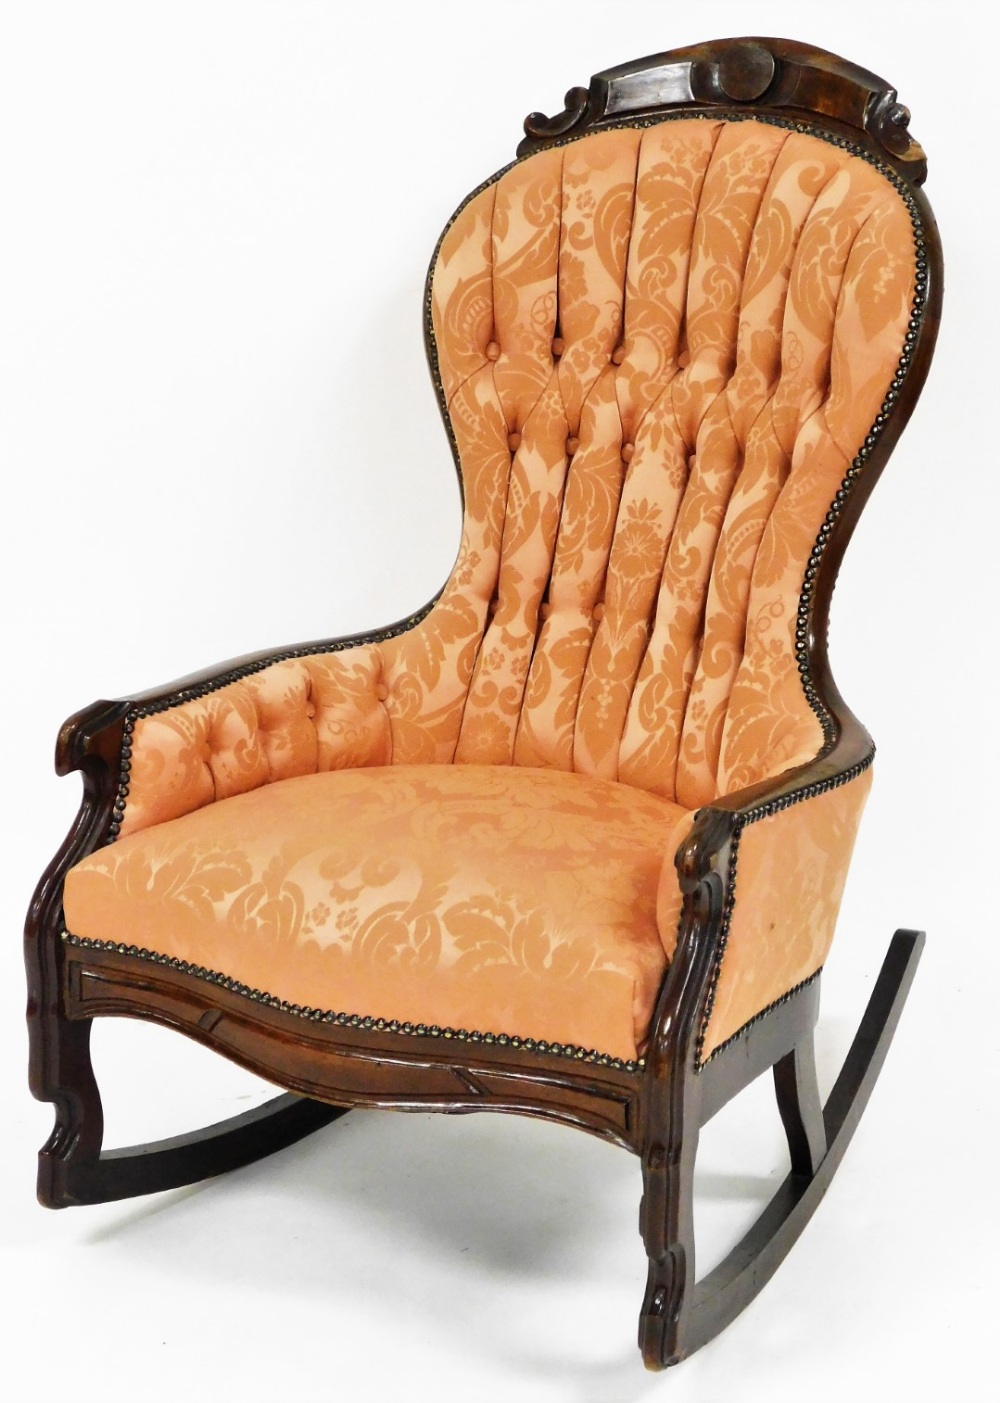 A 19thC mahogany show frame swing back rocking chair, a pink floral upholstered button back, on rock